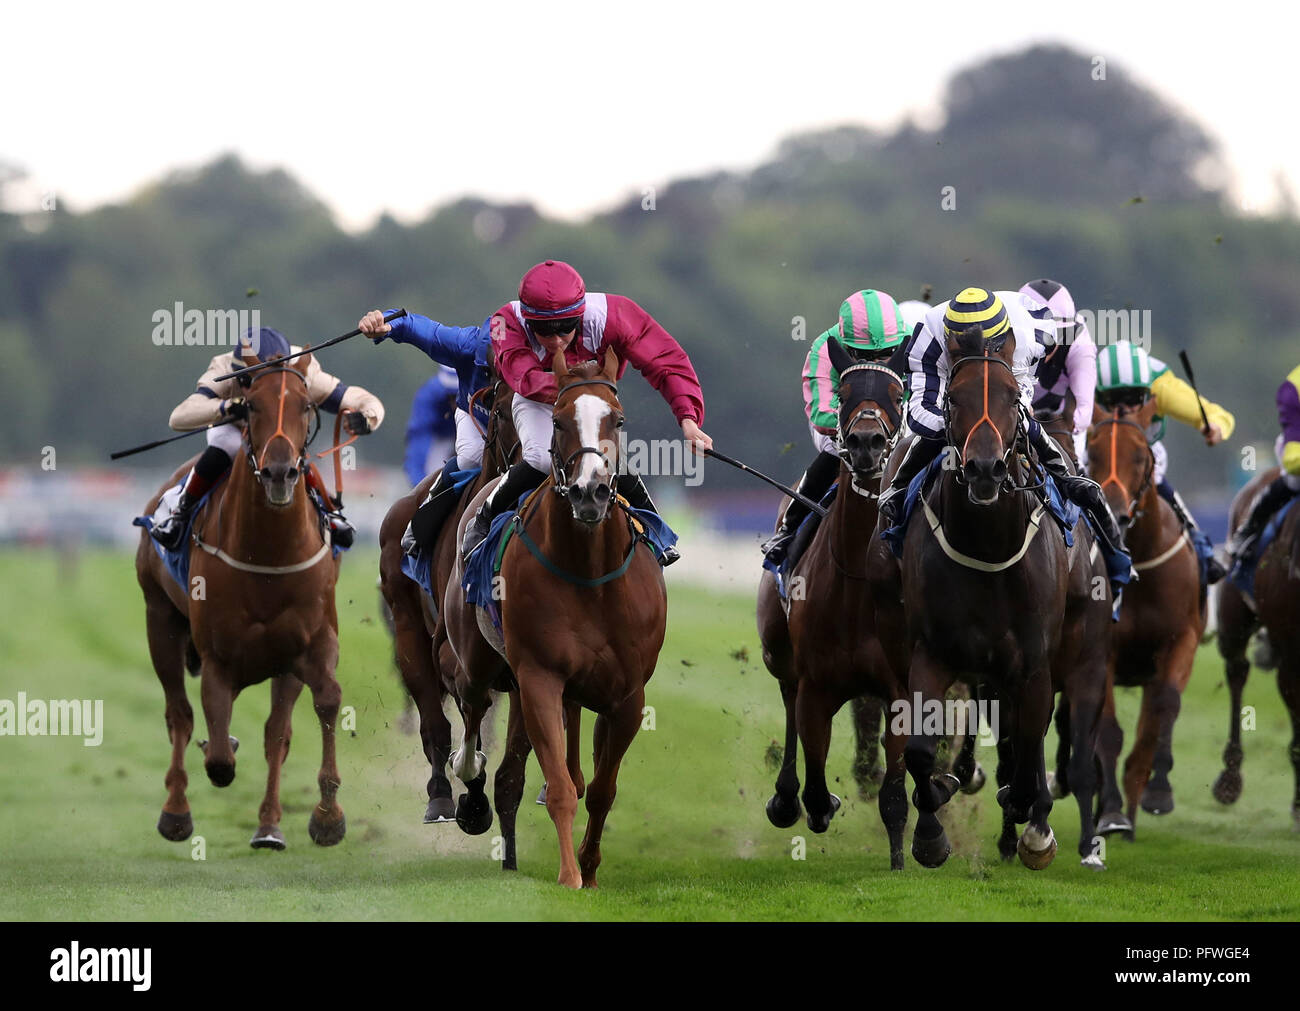 Tis Marvellous ridden by Adam Kirby (centre) wins the Sky Bet And Symphony Group Handicap during Juddmonte International Day of the Yorkshire Ebor Festival at York Racecourse. PRESS ASSOCIATION Photo. Picture date: Wednesday August 22, 2018. See PA story RACING York. Photo credit should read: Tim Goode/PA Wire Stock Photo